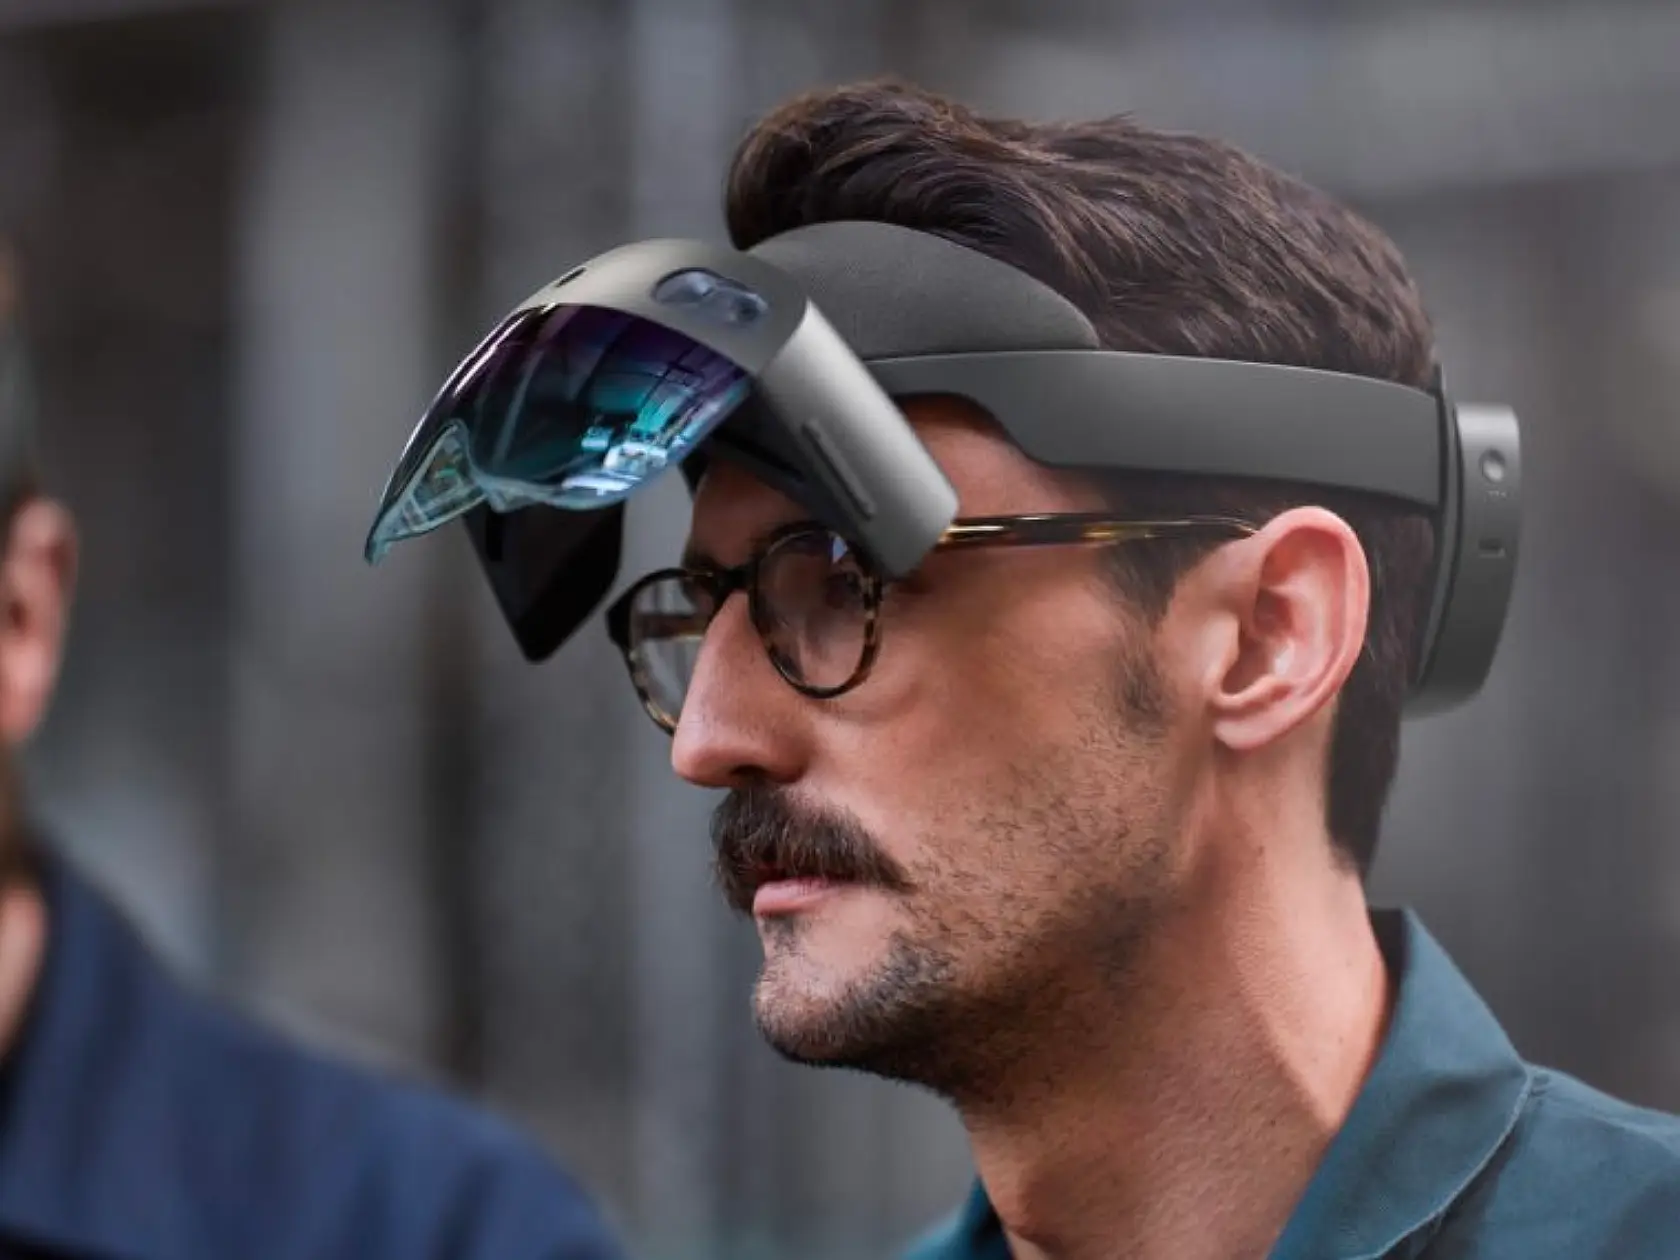 A man with a moustache and glasses wearing a black augmented reality headset with the visor lifted up